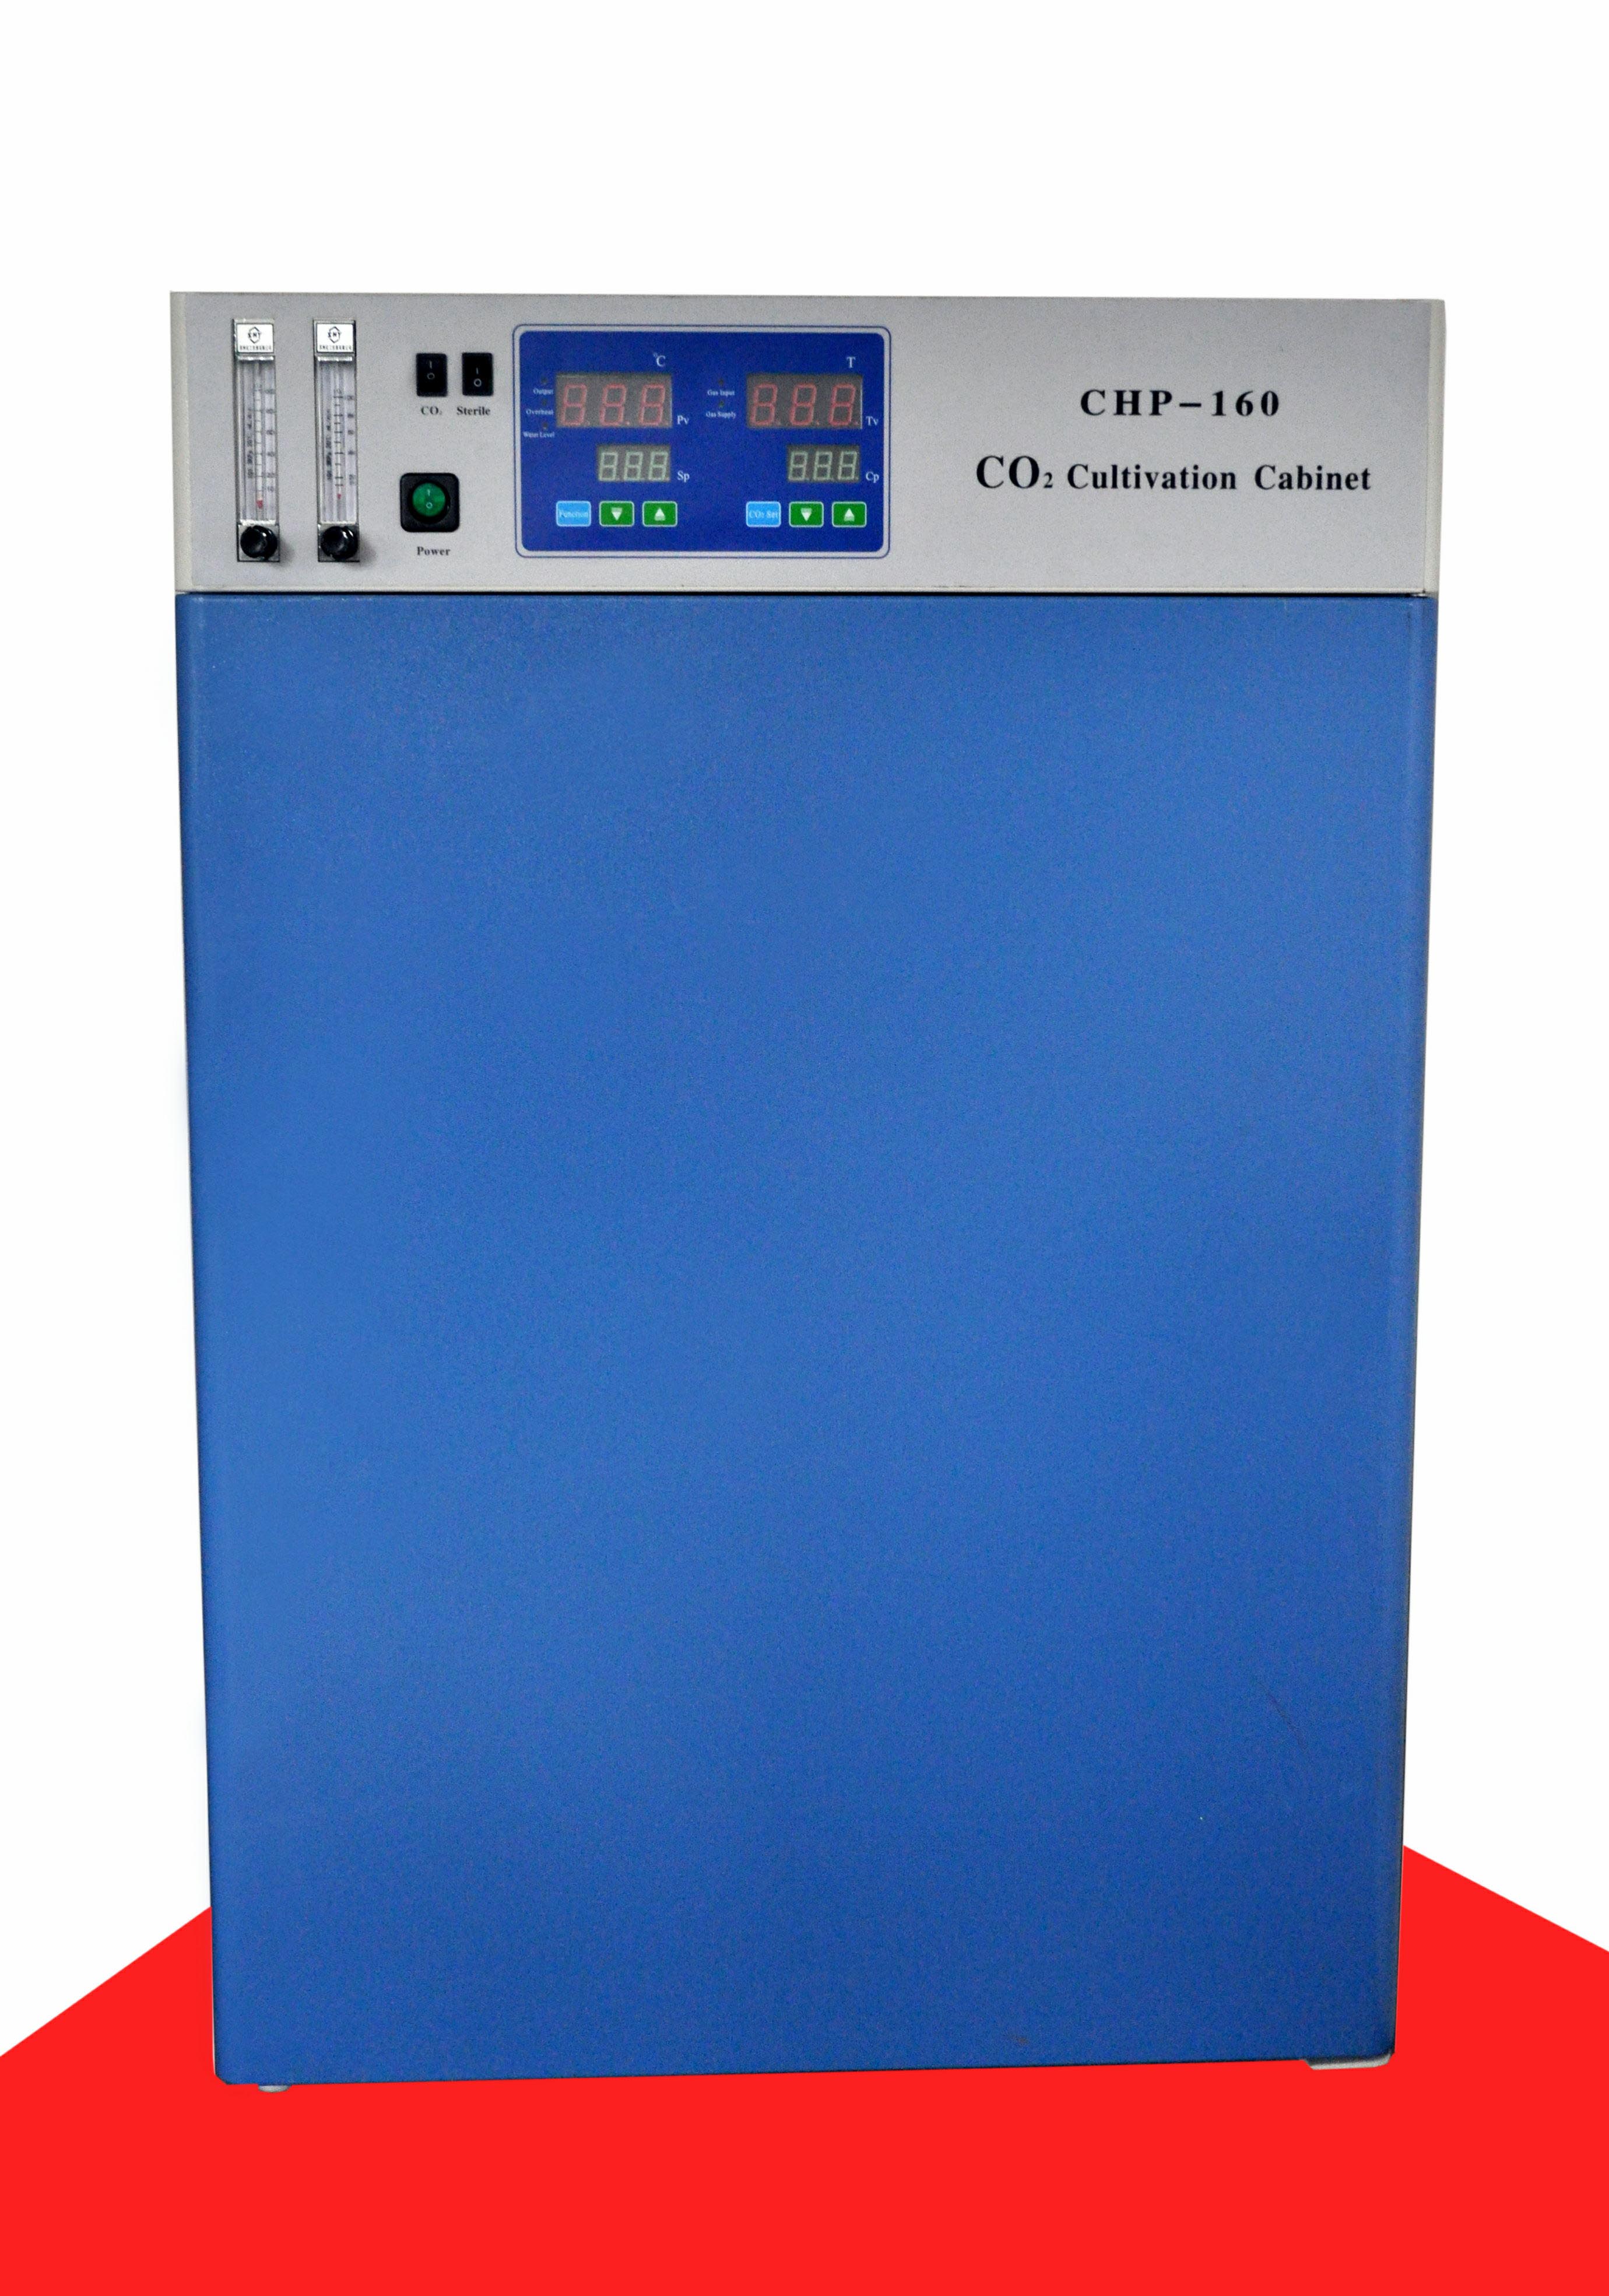 Model CHP/ Series CO2 Cultivaion Cabinet